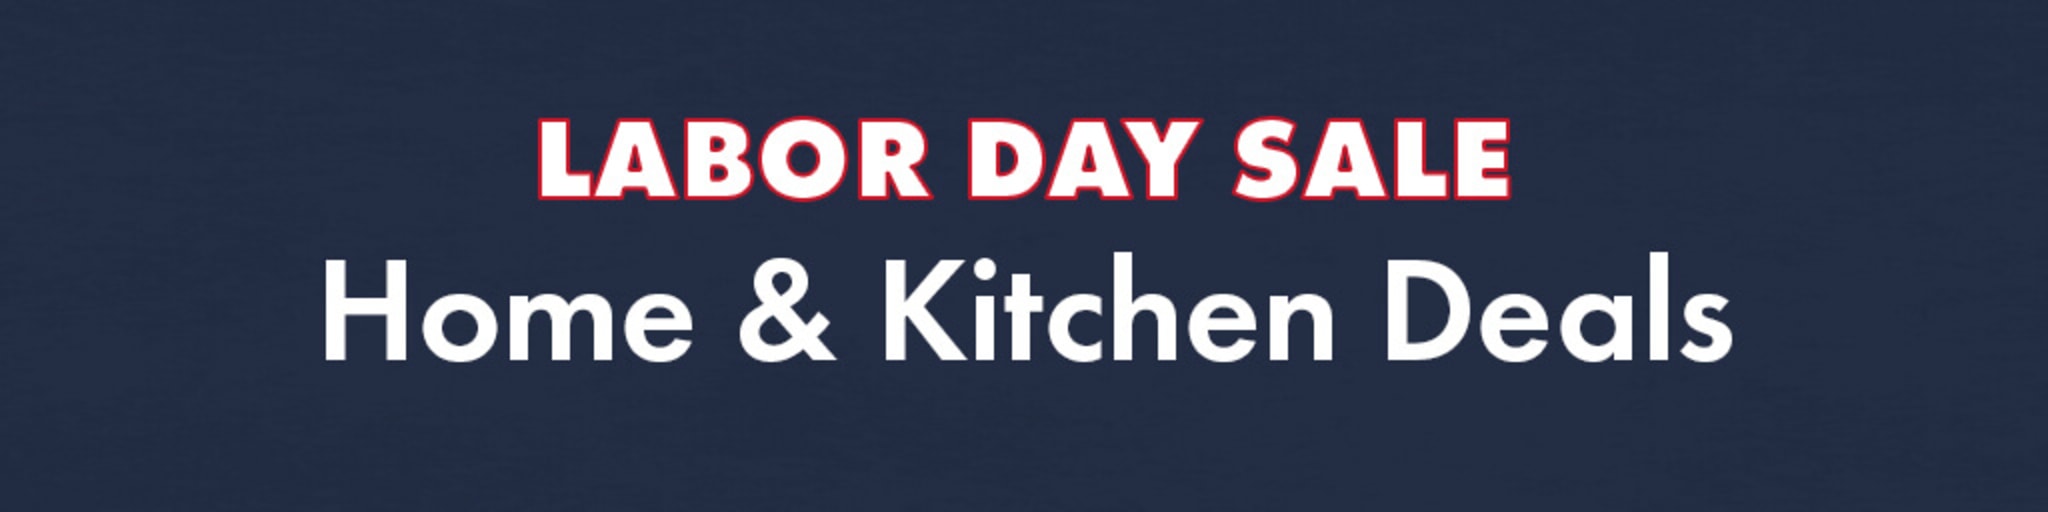 MorningSave: Labor Day Clearance: Home & Kitchen